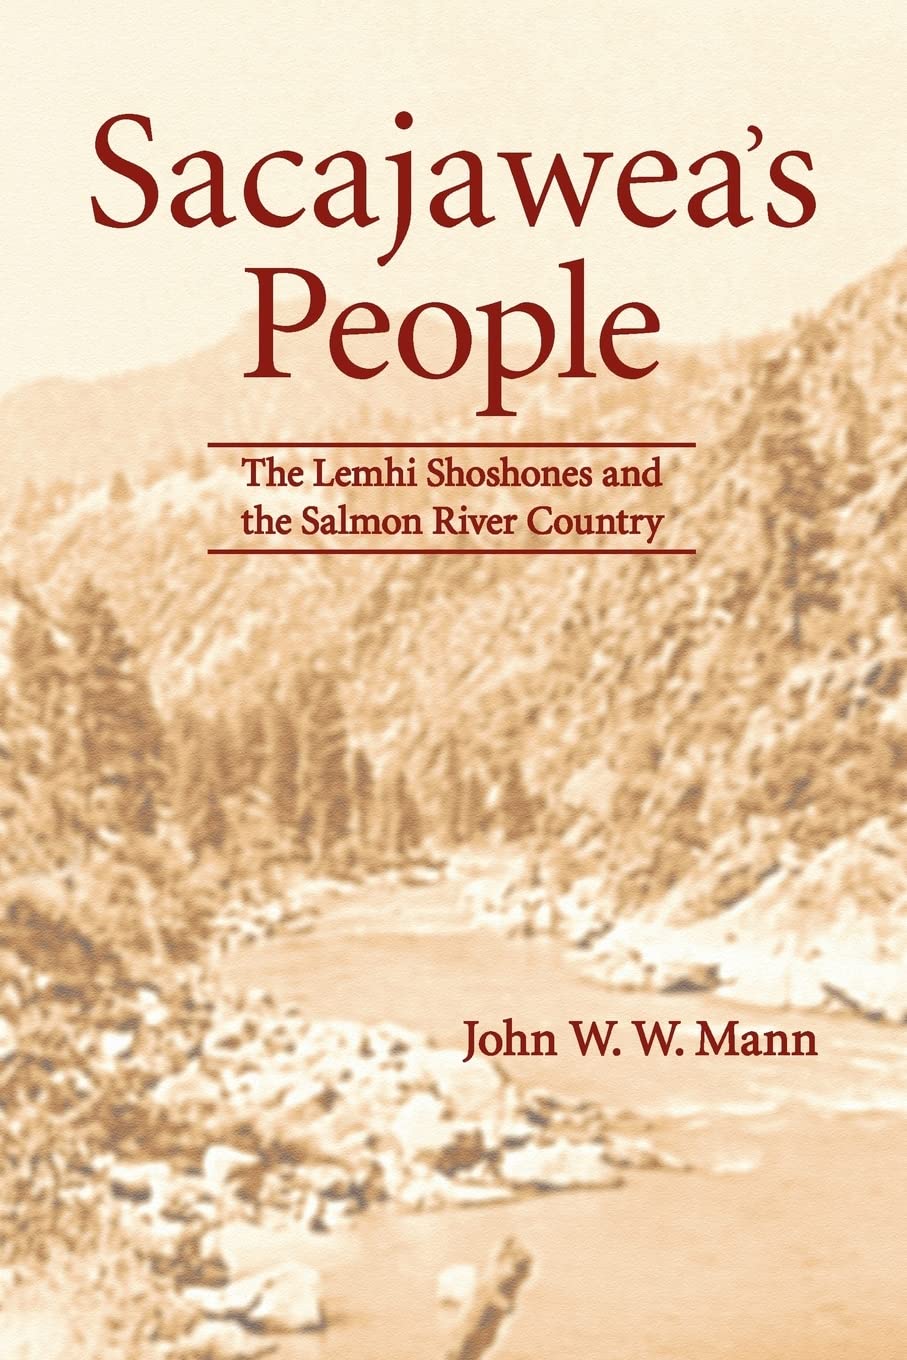 Sacajawea's People: The Lemhi Shoshones and the Salmon River Country